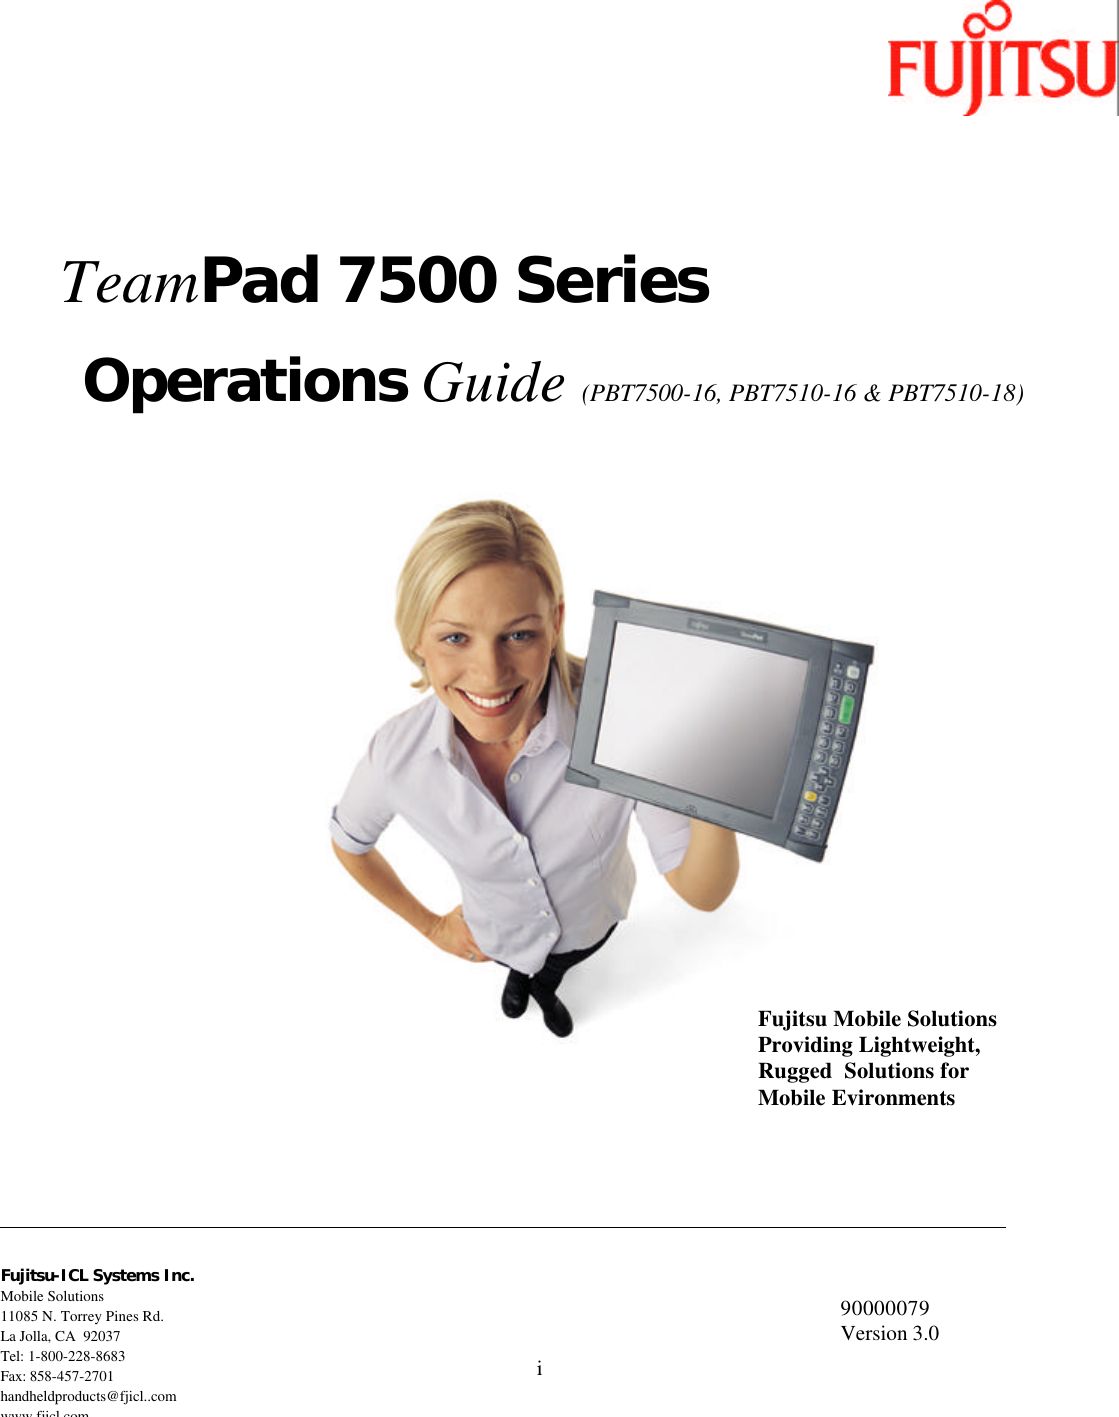 i                                     TeamPad 7500 Series Operations Guide (PBT7500-16, PBT7510-16 &amp; PBT7510-18) Fujitsu-ICL Systems Inc. Mobile Solutions 11085 N. Torrey Pines Rd. La Jolla, CA  92037 Tel: 1-800-228-8683 Fax: 858-457-2701 handheldproducts@fjicl..com www.fjicl.com 90000079 Version 3.0 Fujitsu Mobile Solutions Providing Lightweight, Rugged  Solutions for Mobile Evironments 